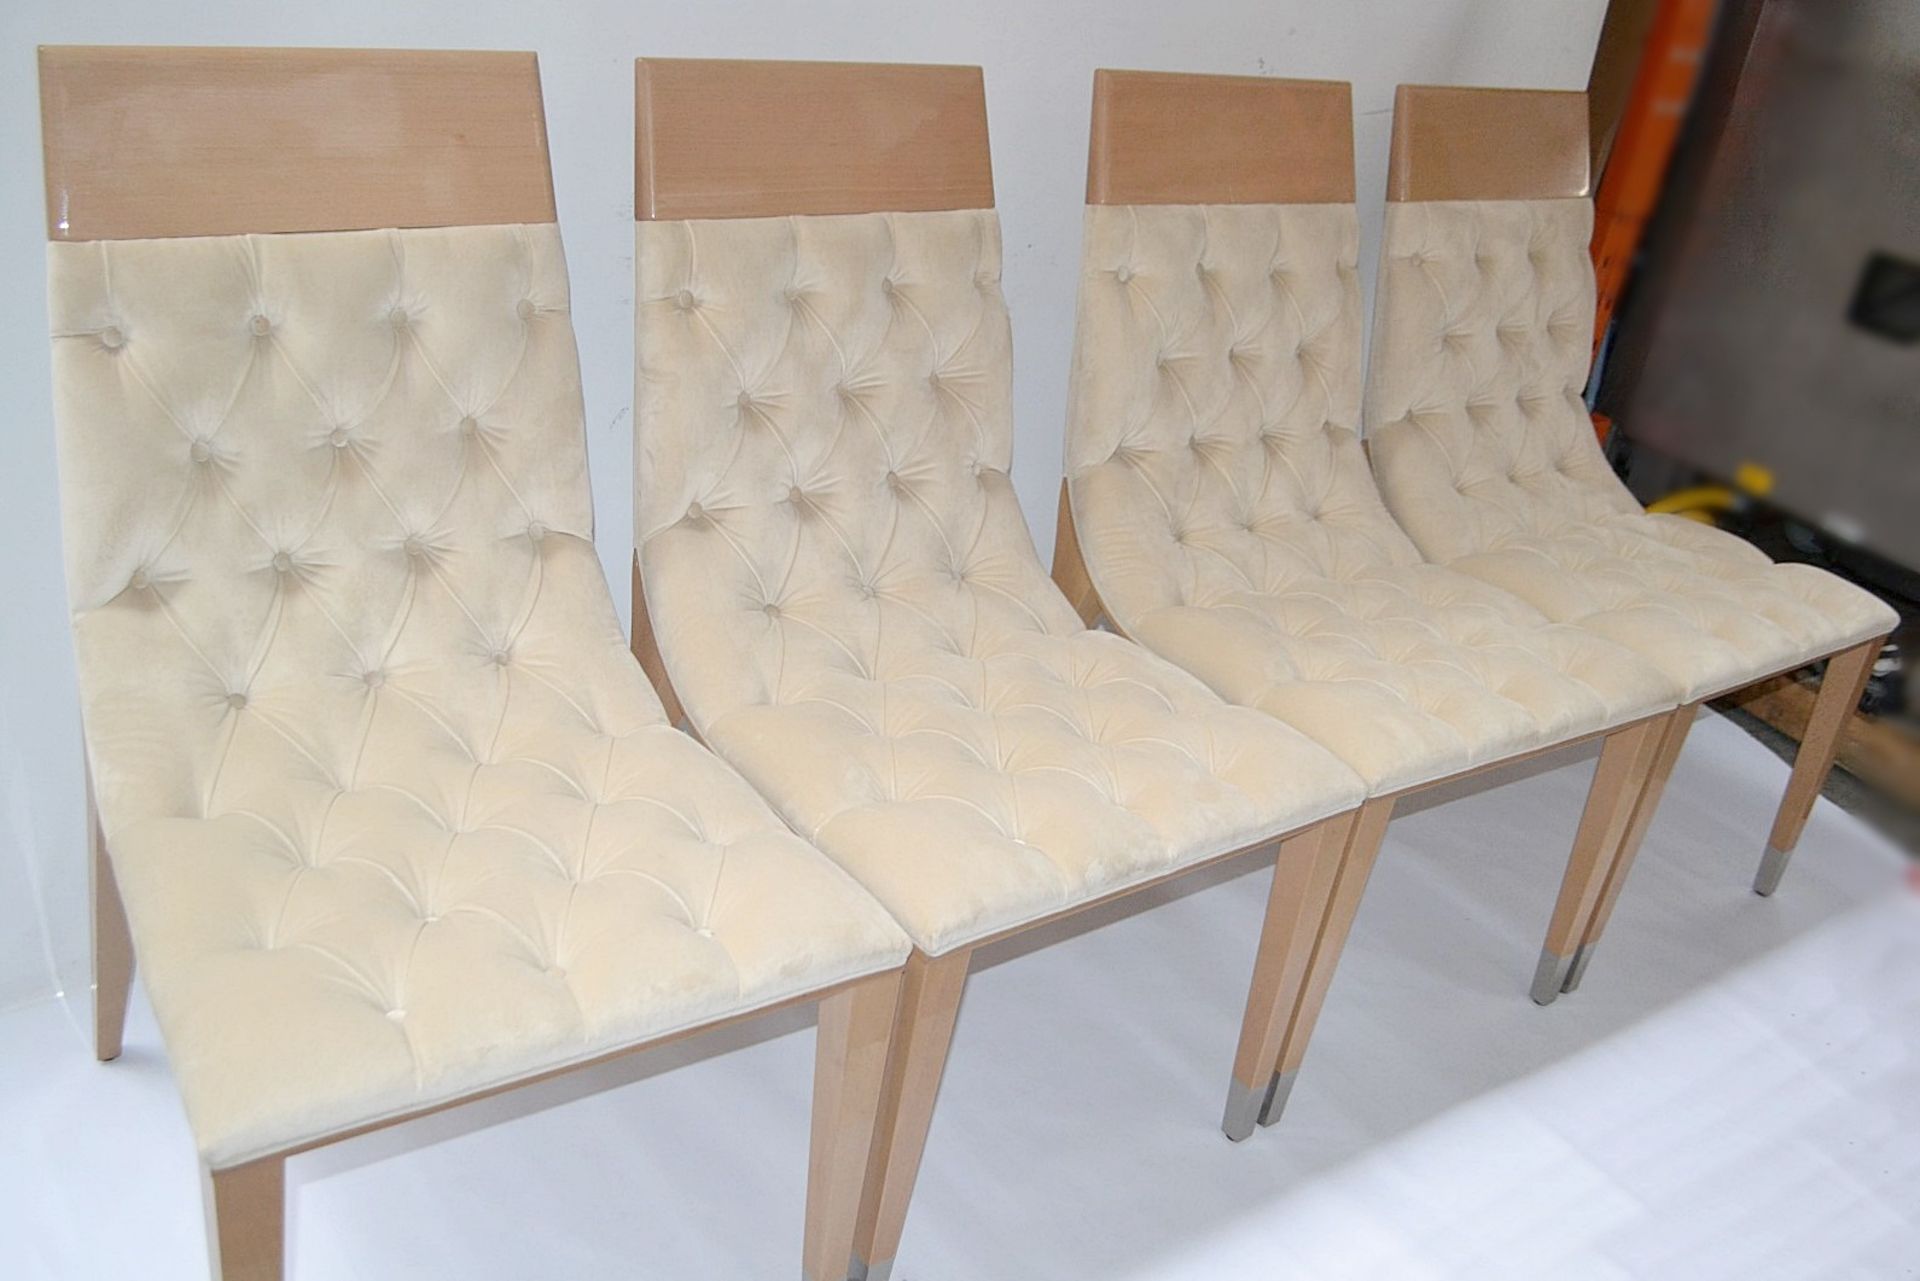 4 x GIORGIO COLLECTION 'Sunrise' Italian Designer Dining Chairs - Pre-owned In Good Condition - Image 2 of 14